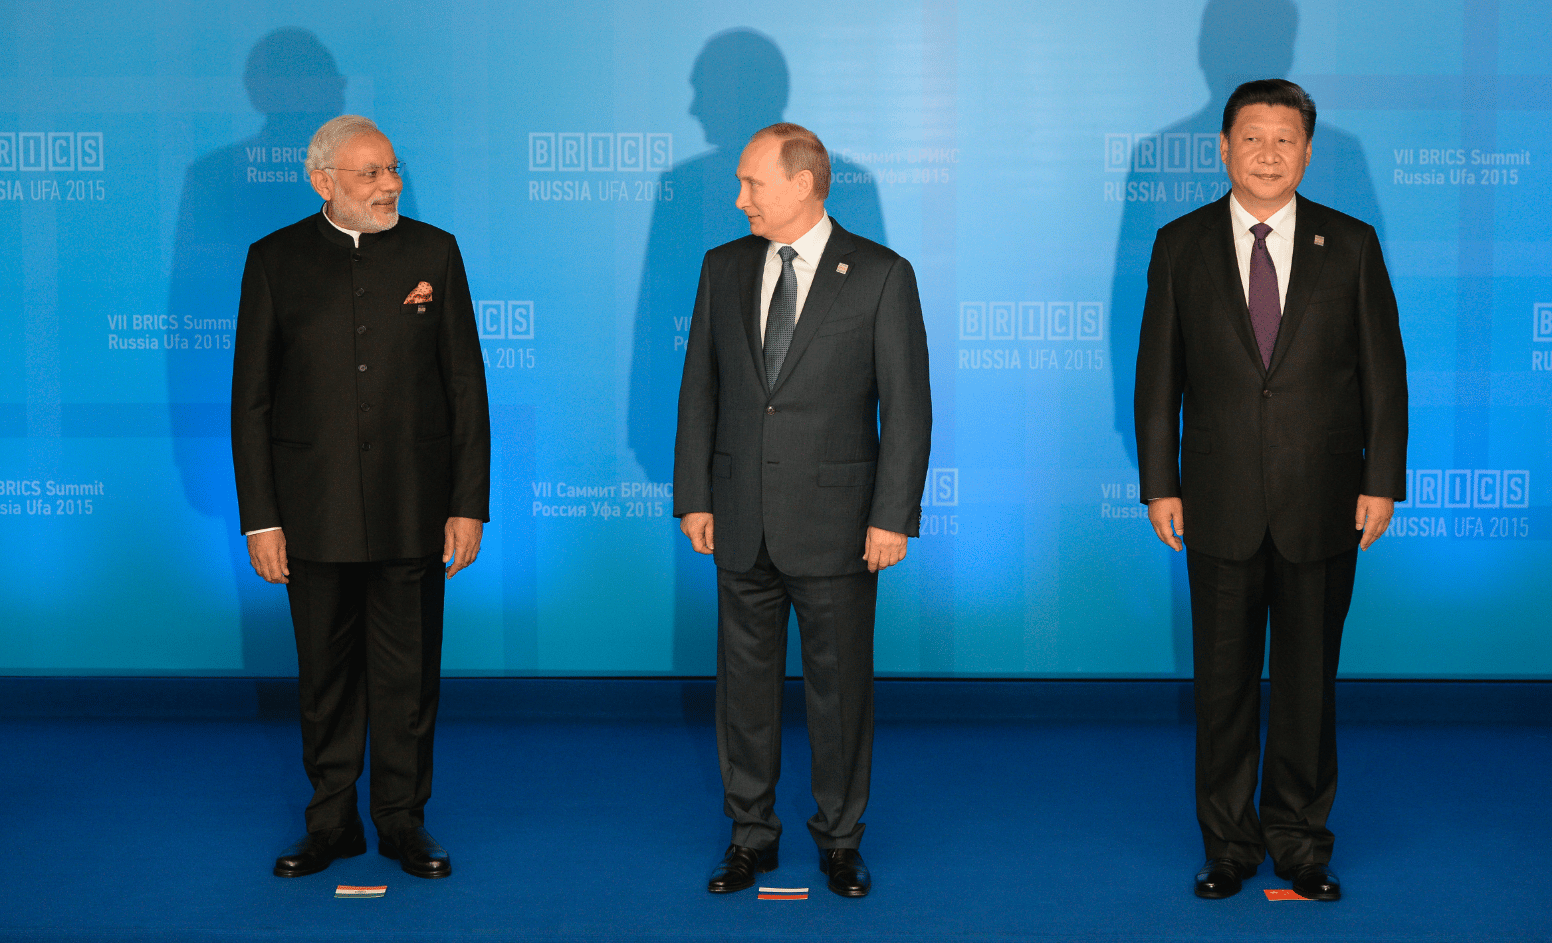 Putin Will Meet with Modi, Xi this Week in Effort to Boost Russia’s Ties with India & China